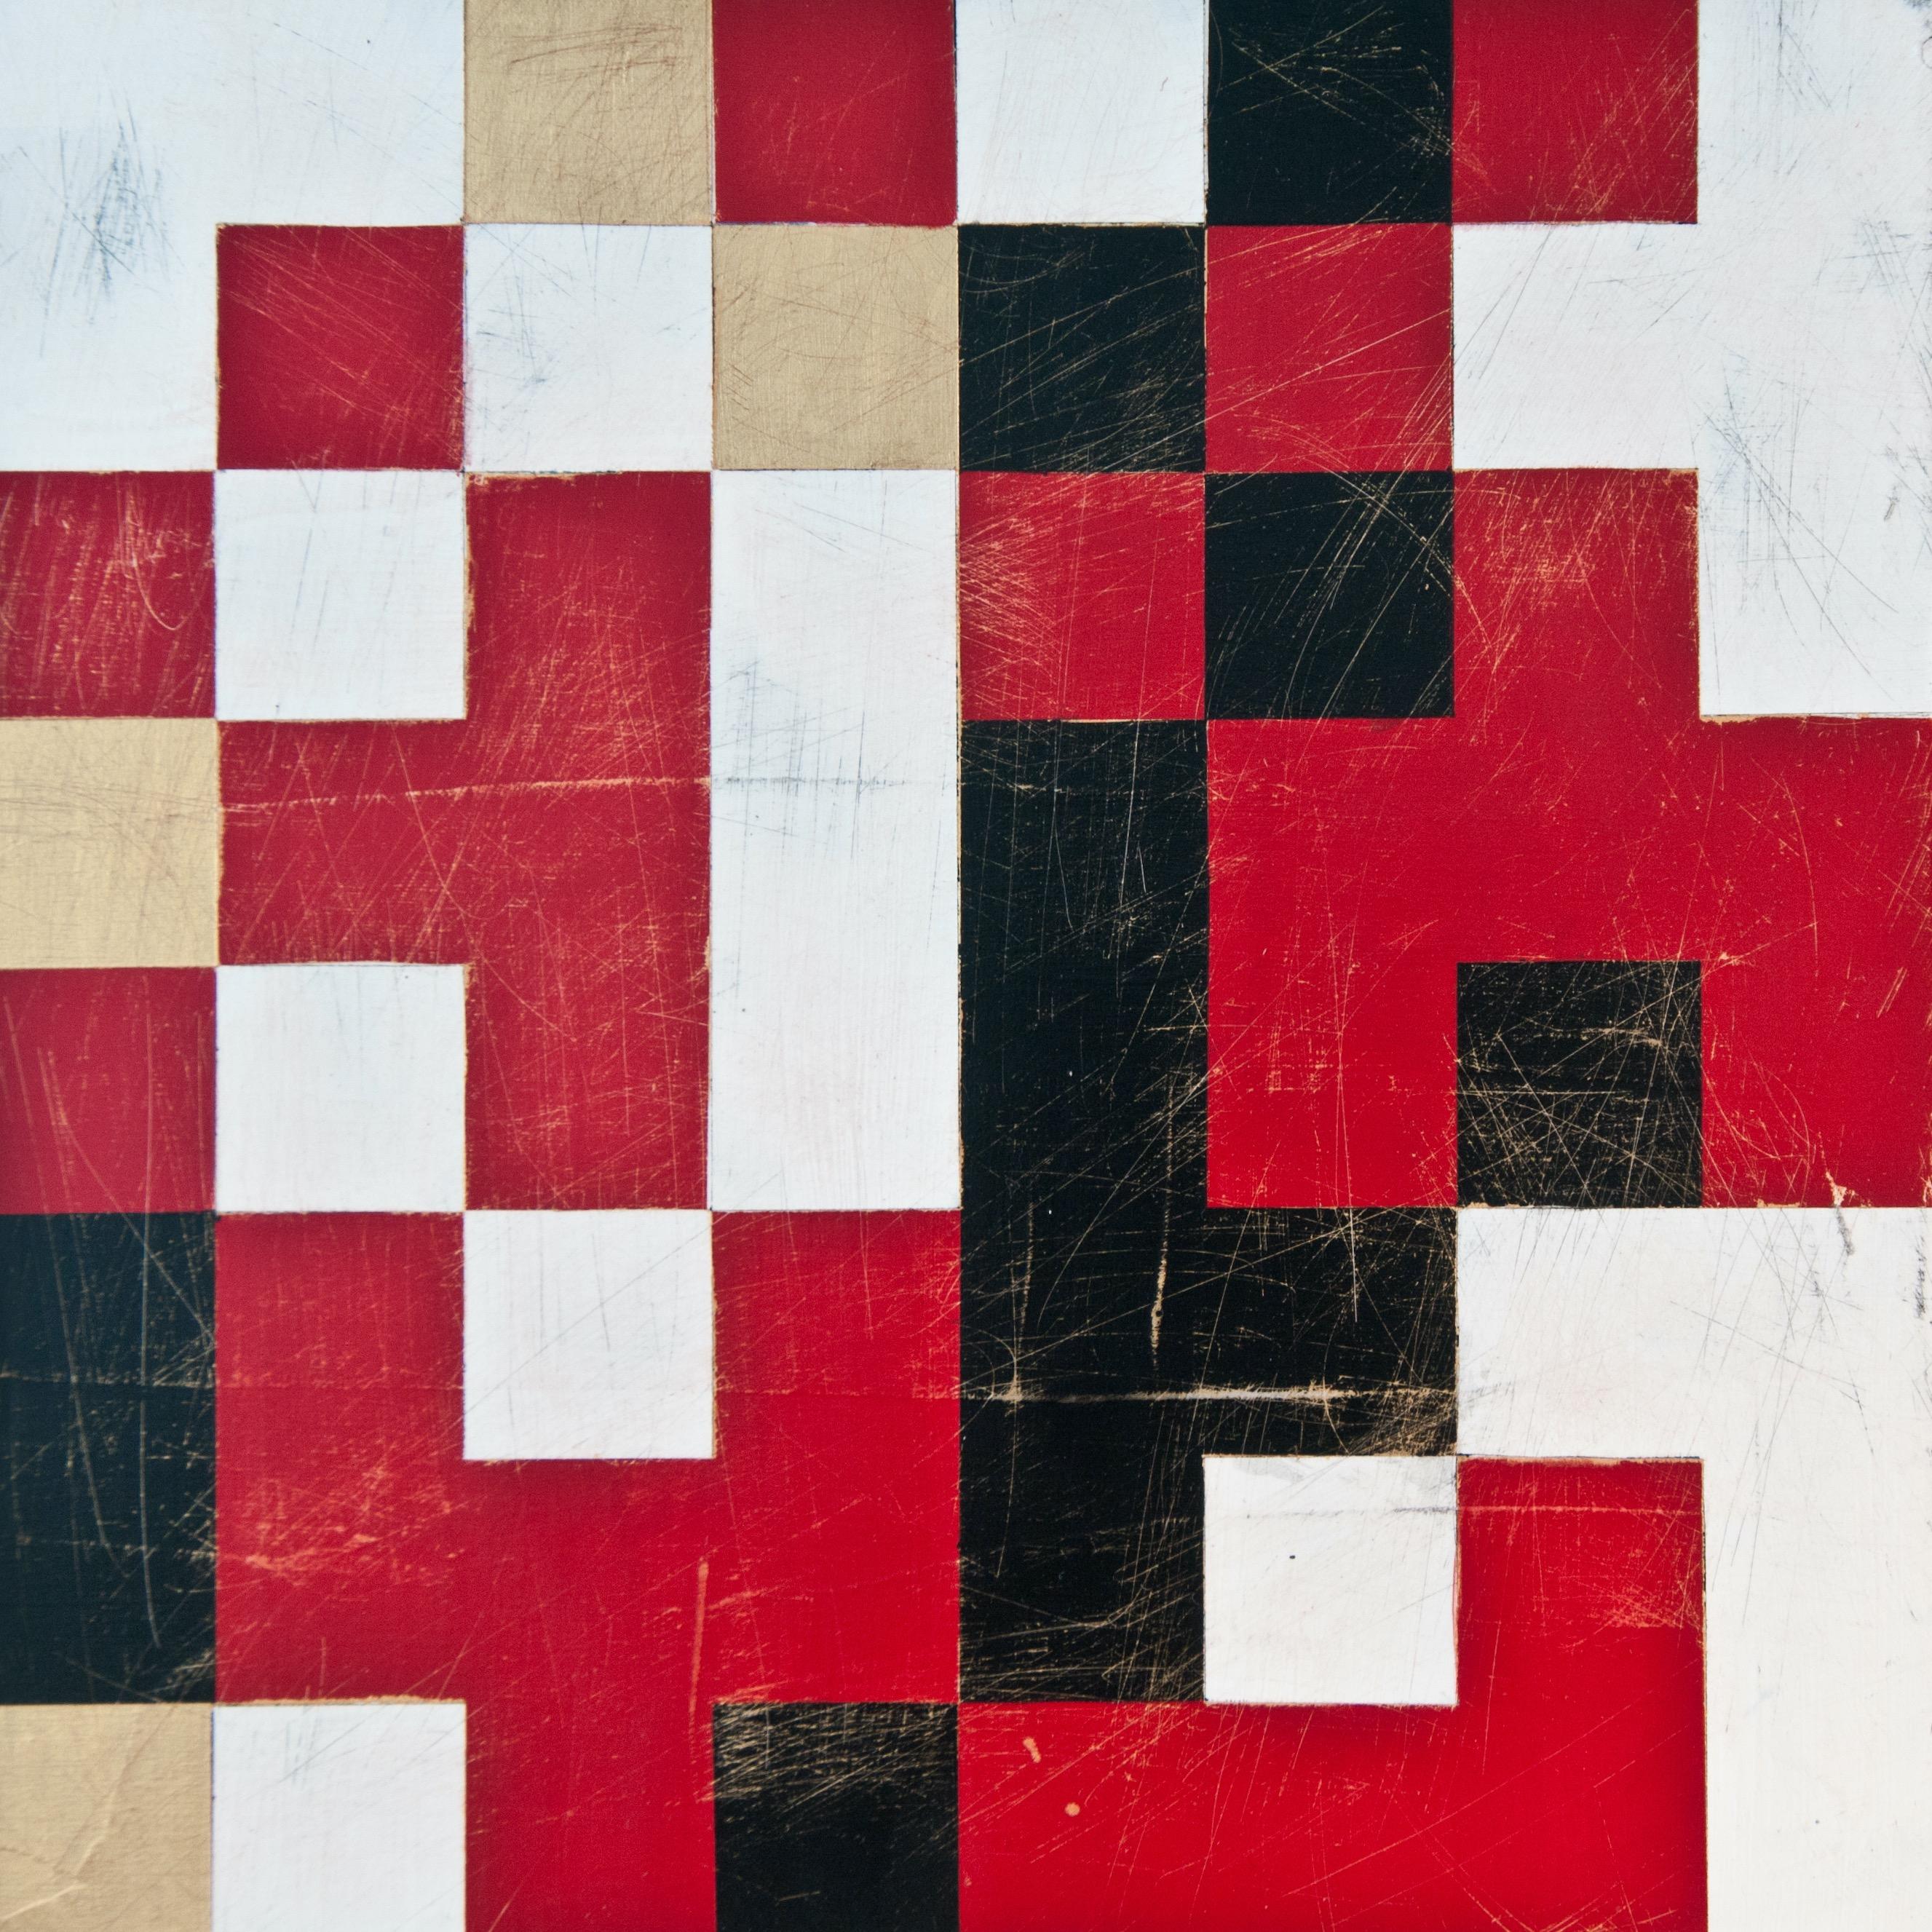 "Cipher Six (Sense)", abstract, geometric, red, black, white, acrylic painting - Painting by Denise Driscoll